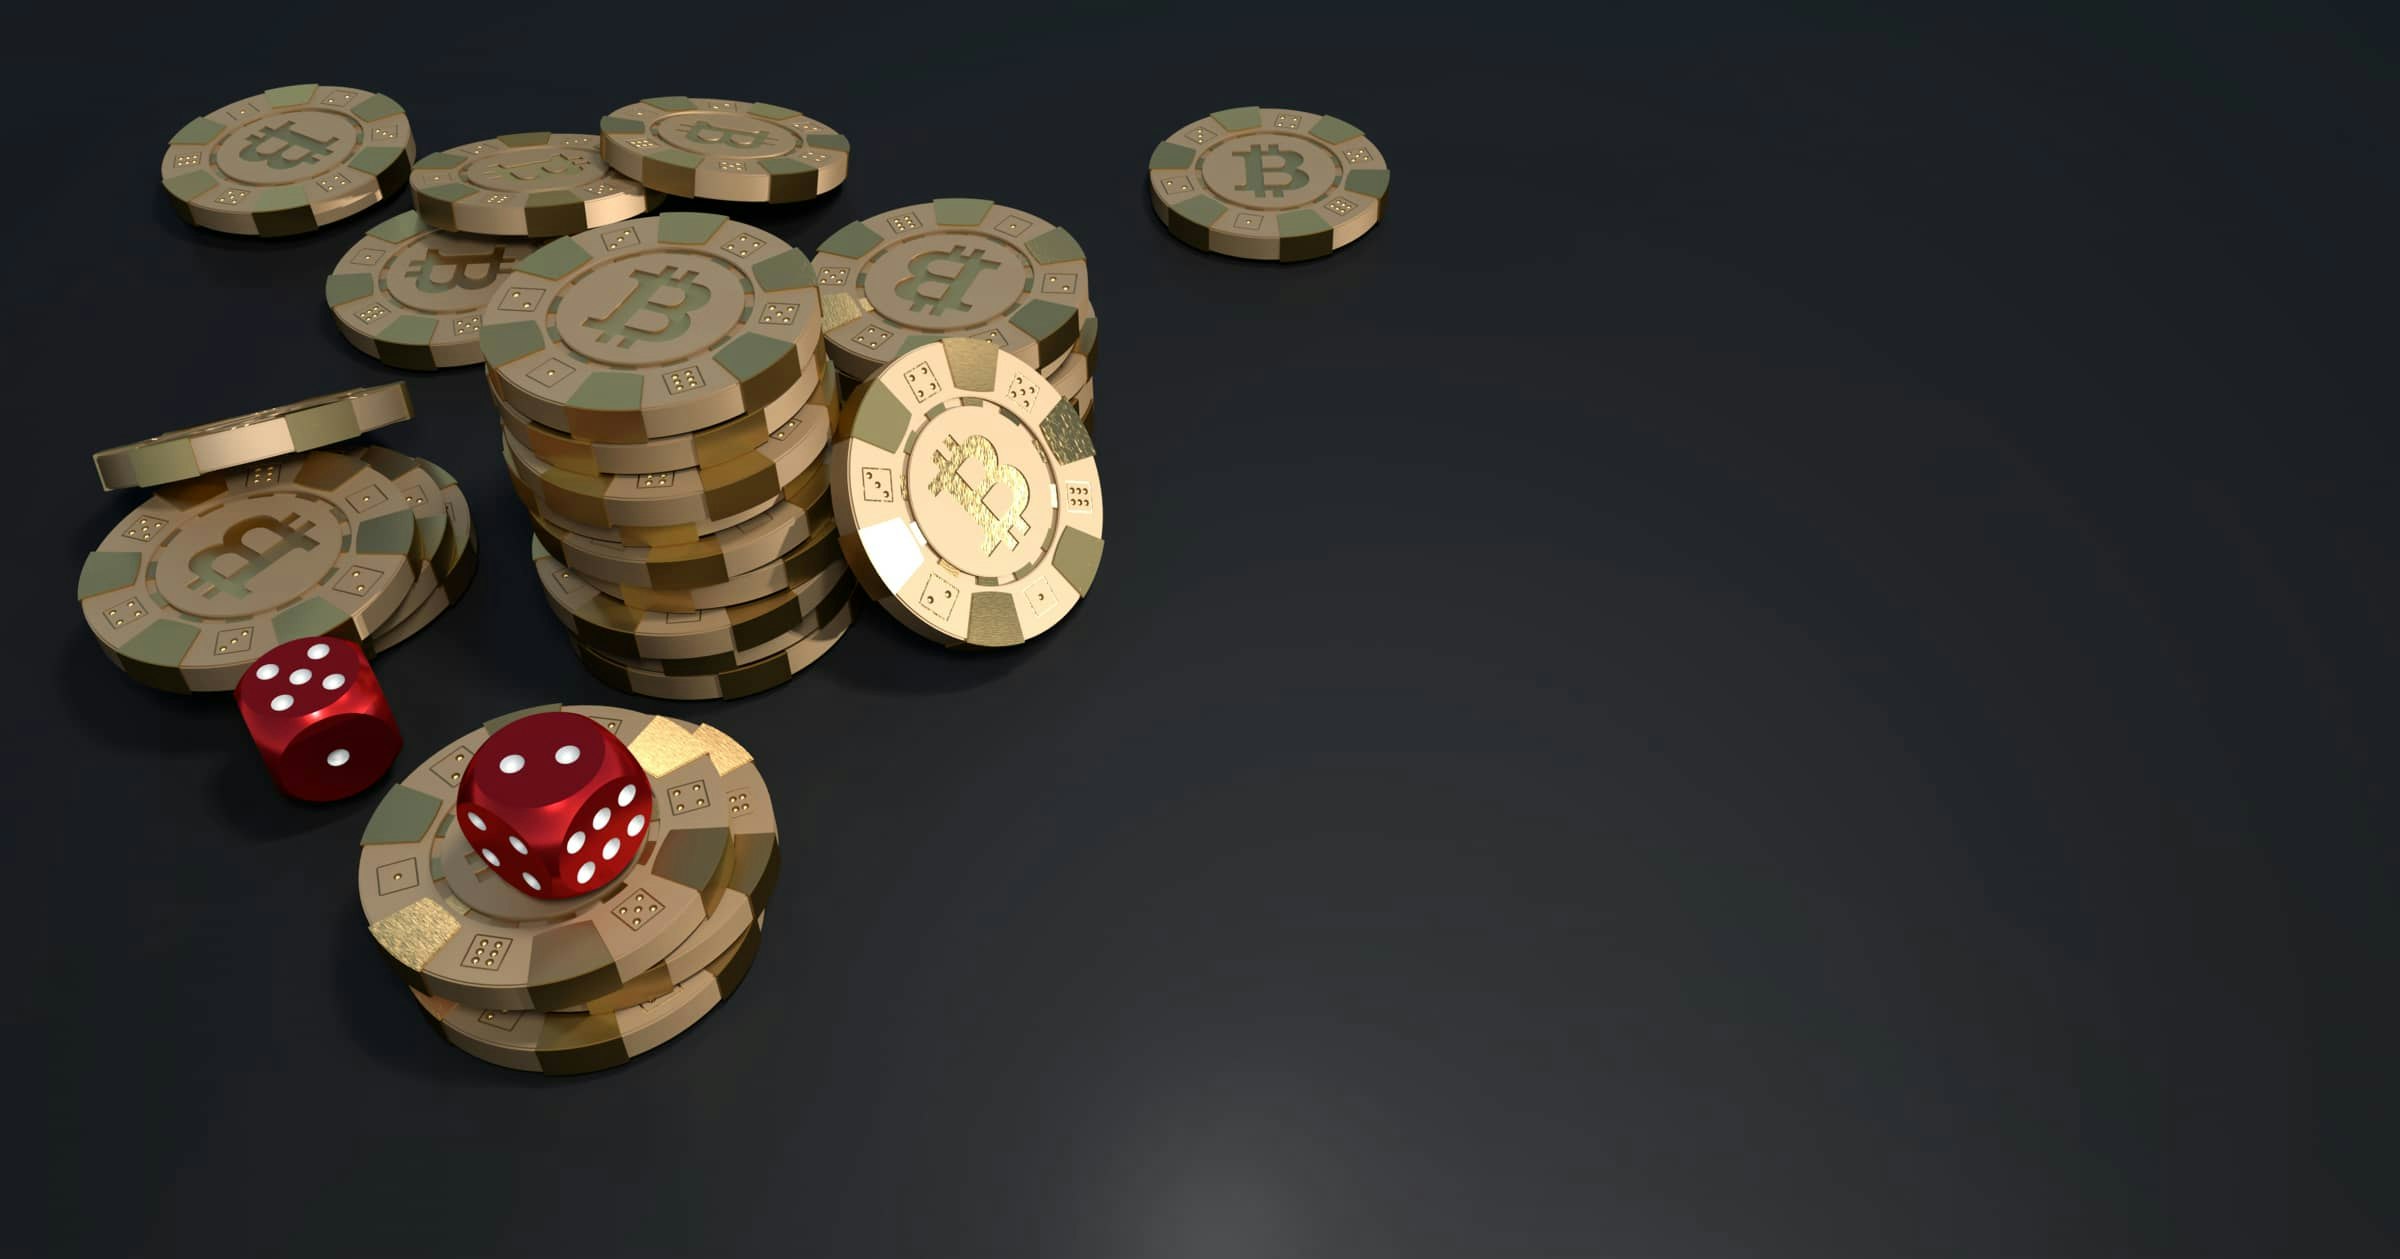 Bitcoin online casino: Play casino games with virtual currencies!